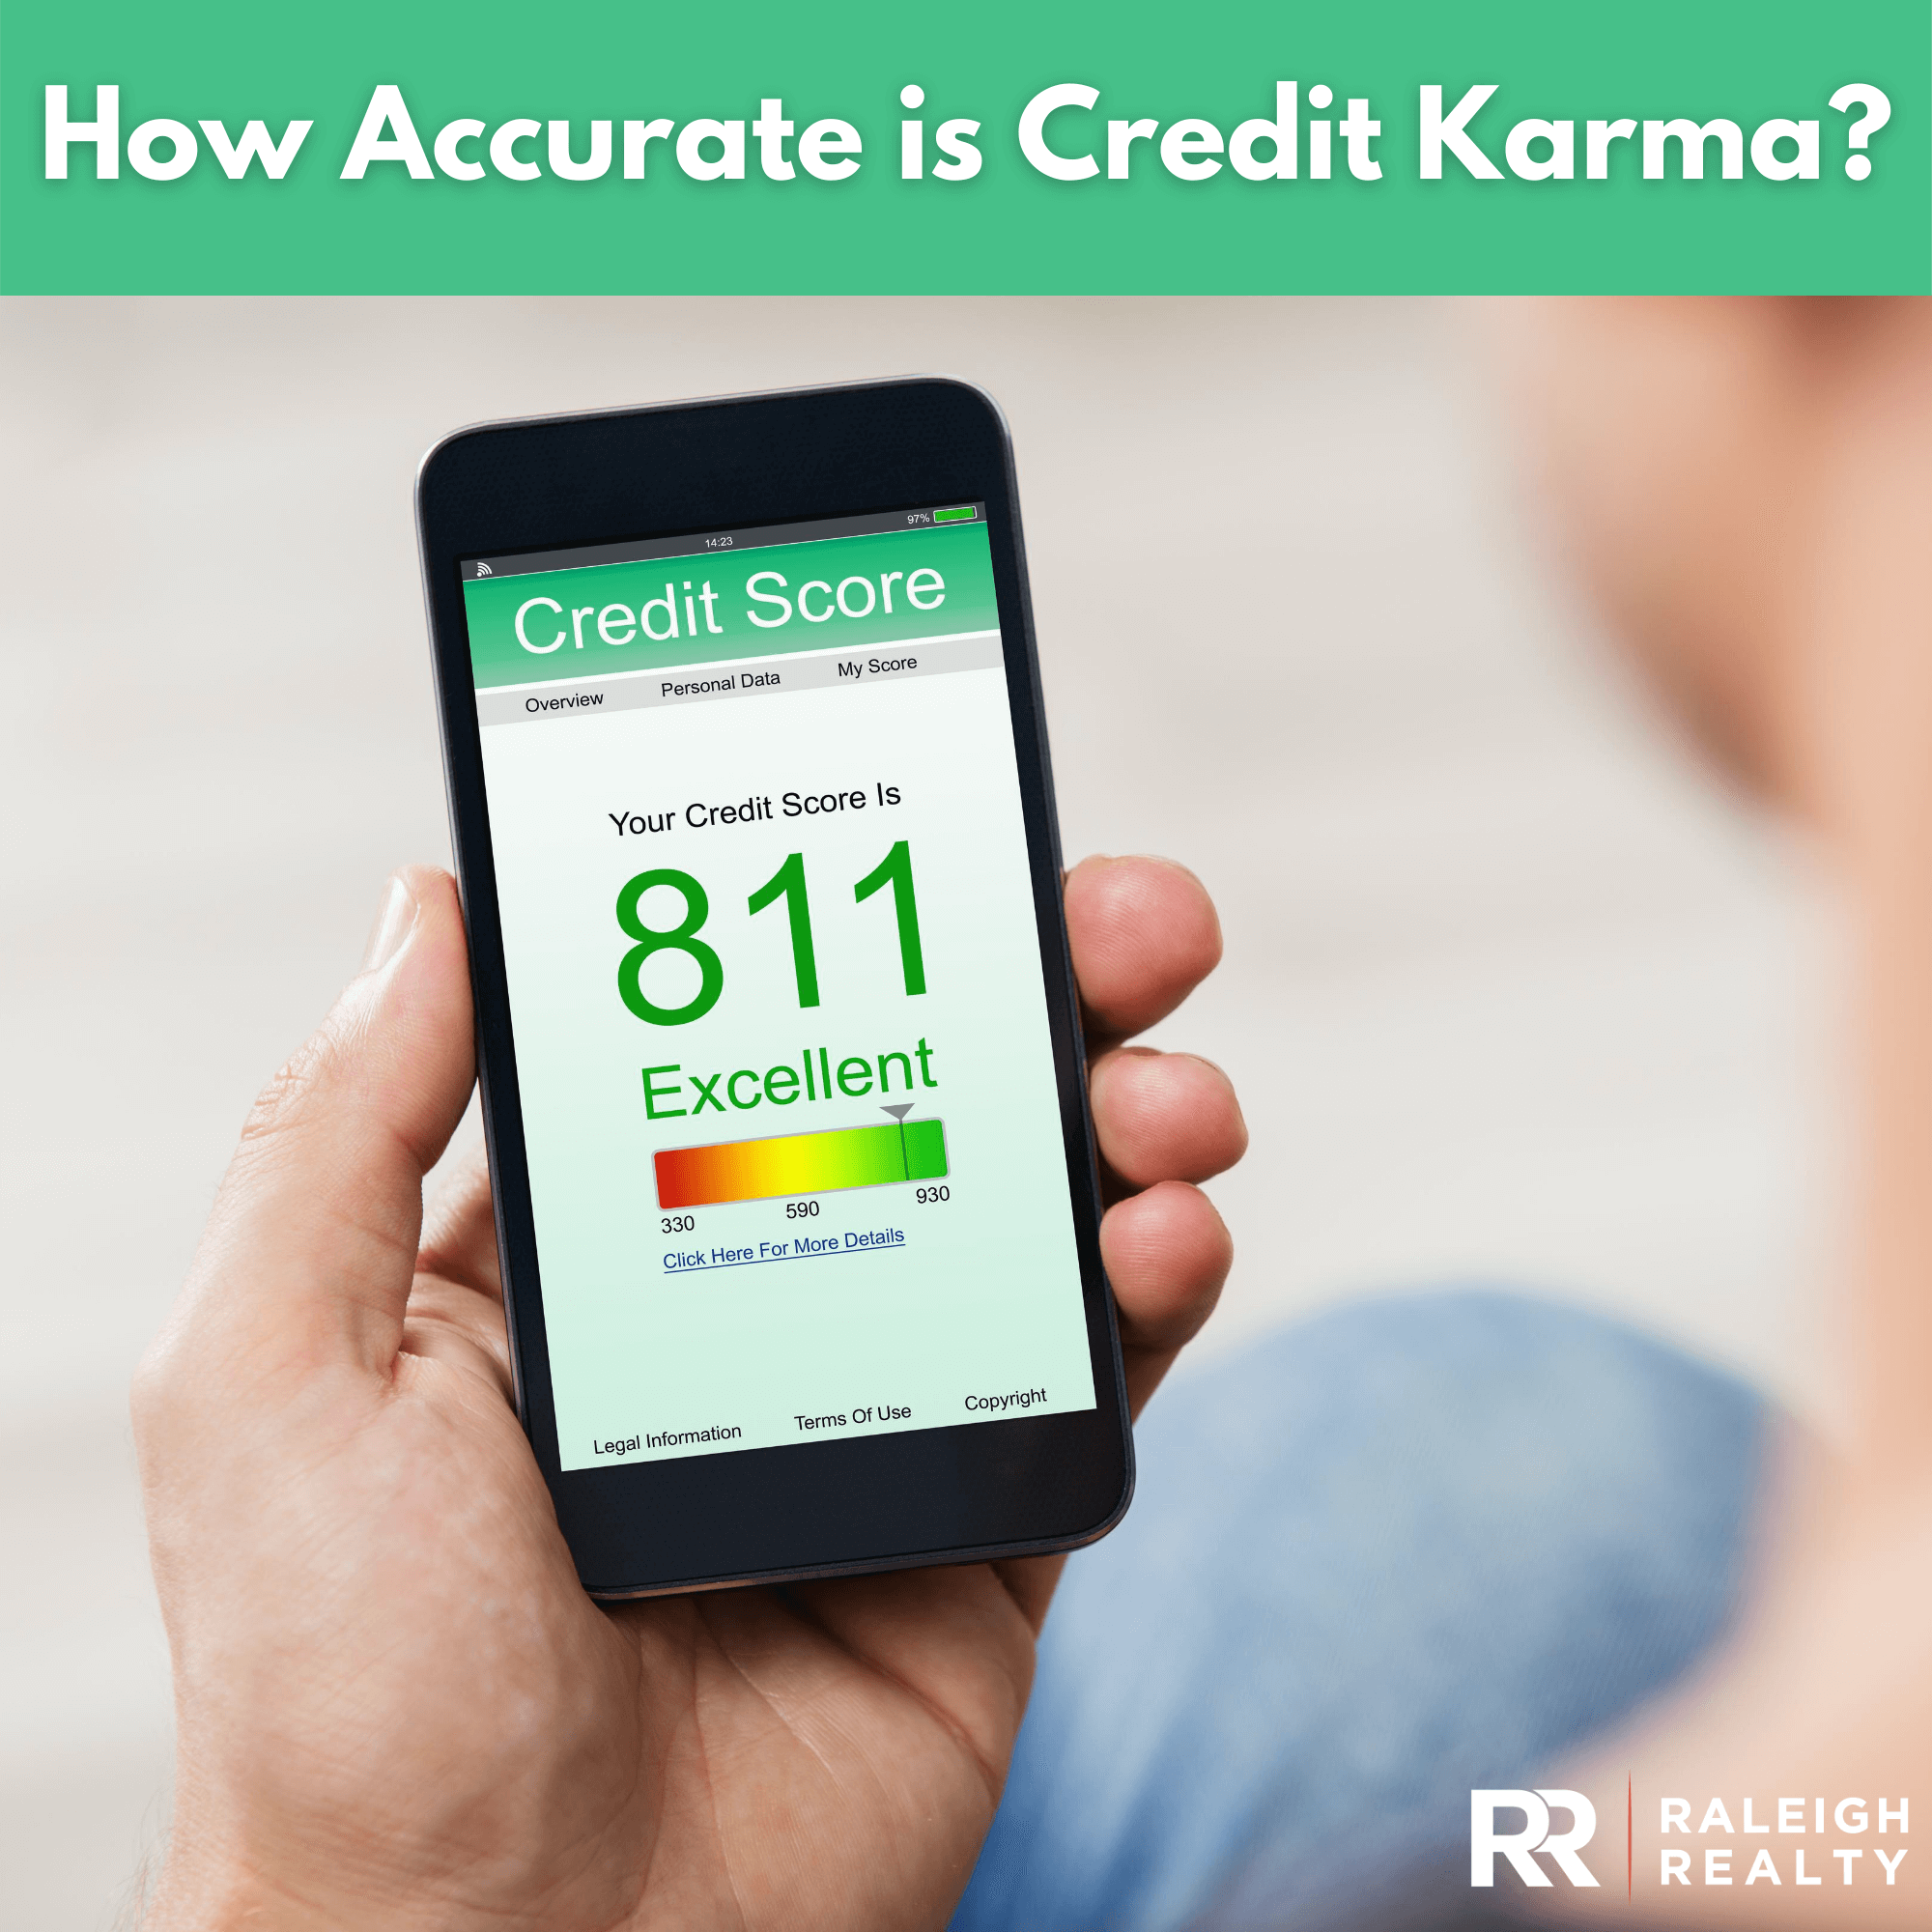 How Accurate is Credit Karma?